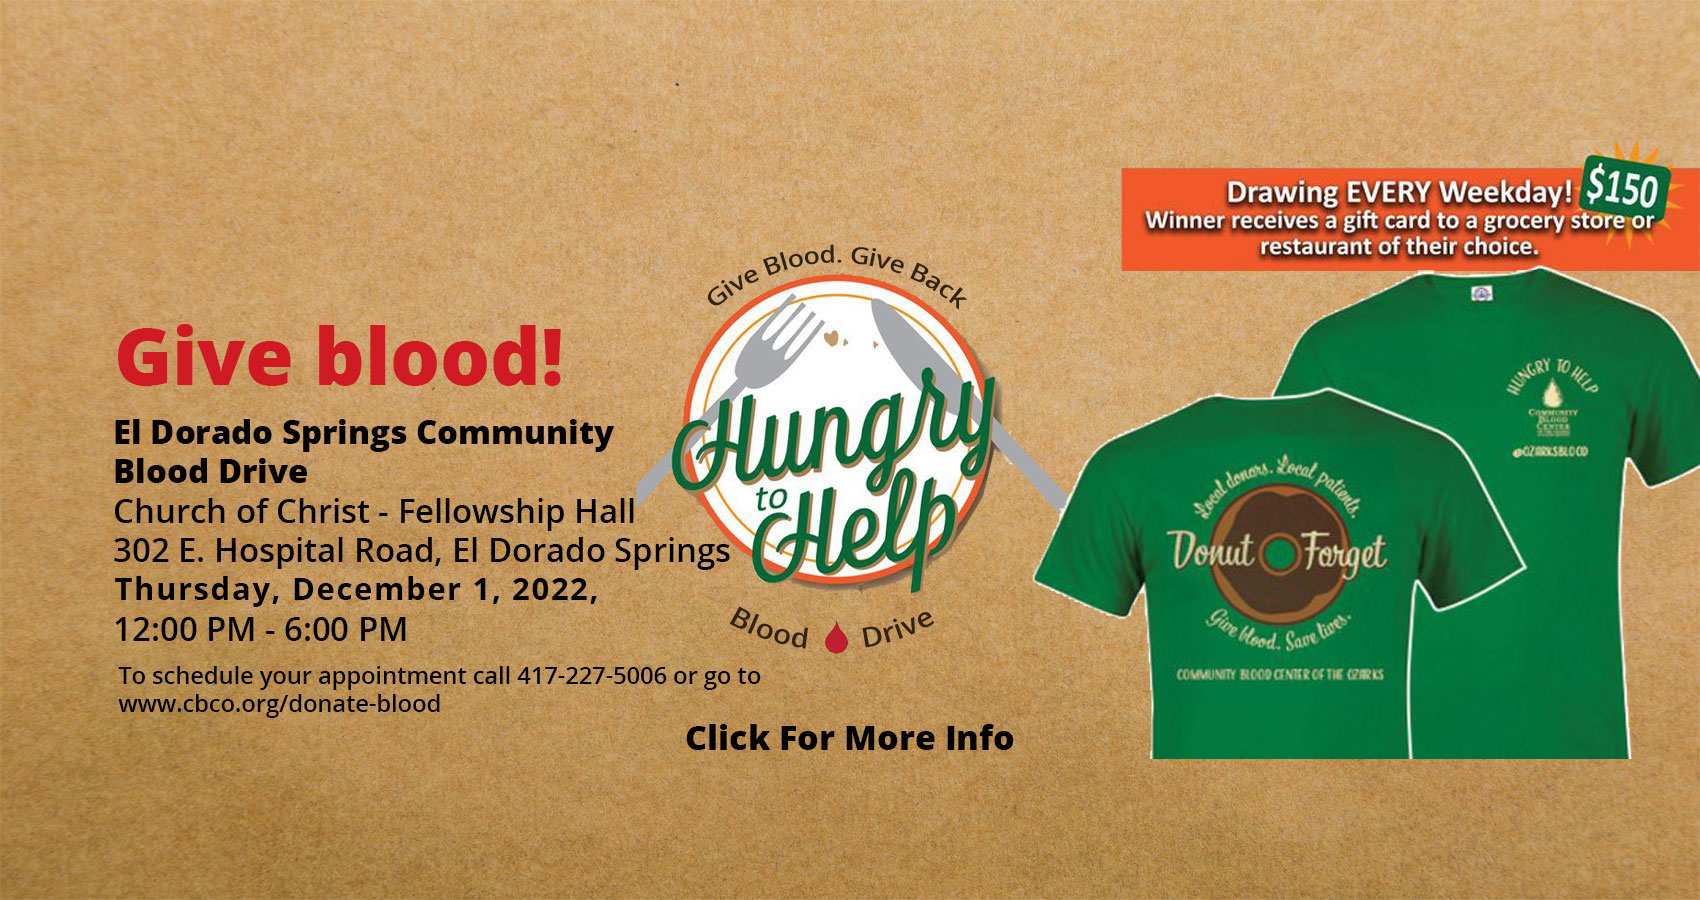 Banner picture of The El Dorado Springs Community Blood Drive T-shirt design that has a Donut on the back of the shirt. It says "Donut Forget" -Local donors, Local patients. Give blood, Save lives.
-COMMUNITY BLOOD CENTER OF THE OZARKS. The front right side pocket side of the shirt says: HUNGRY TO HELP

Banner says:
Give Blood!
El Dorado Springs Community Blood Drive
Church of Christ- Fellowship Hall
302 E. Hospital Road, El Dorado Springs 
Wednesday, June 8, 2022
12:00 PM - 6:00 PM
To schedule your appointment call (417)-227-5006 or go to www.cbco.org/donate-blood

Give Blood. Give Back
Blood Drive
Click For More Info
(circle icon of a plate with crumbs, fork, and knife. It says: "Hungry to Help"

* Drawing EVERY Weekday! $150 Winner receives a gift card to a grocery store or restaurant of their choice.

((Click For More Info))